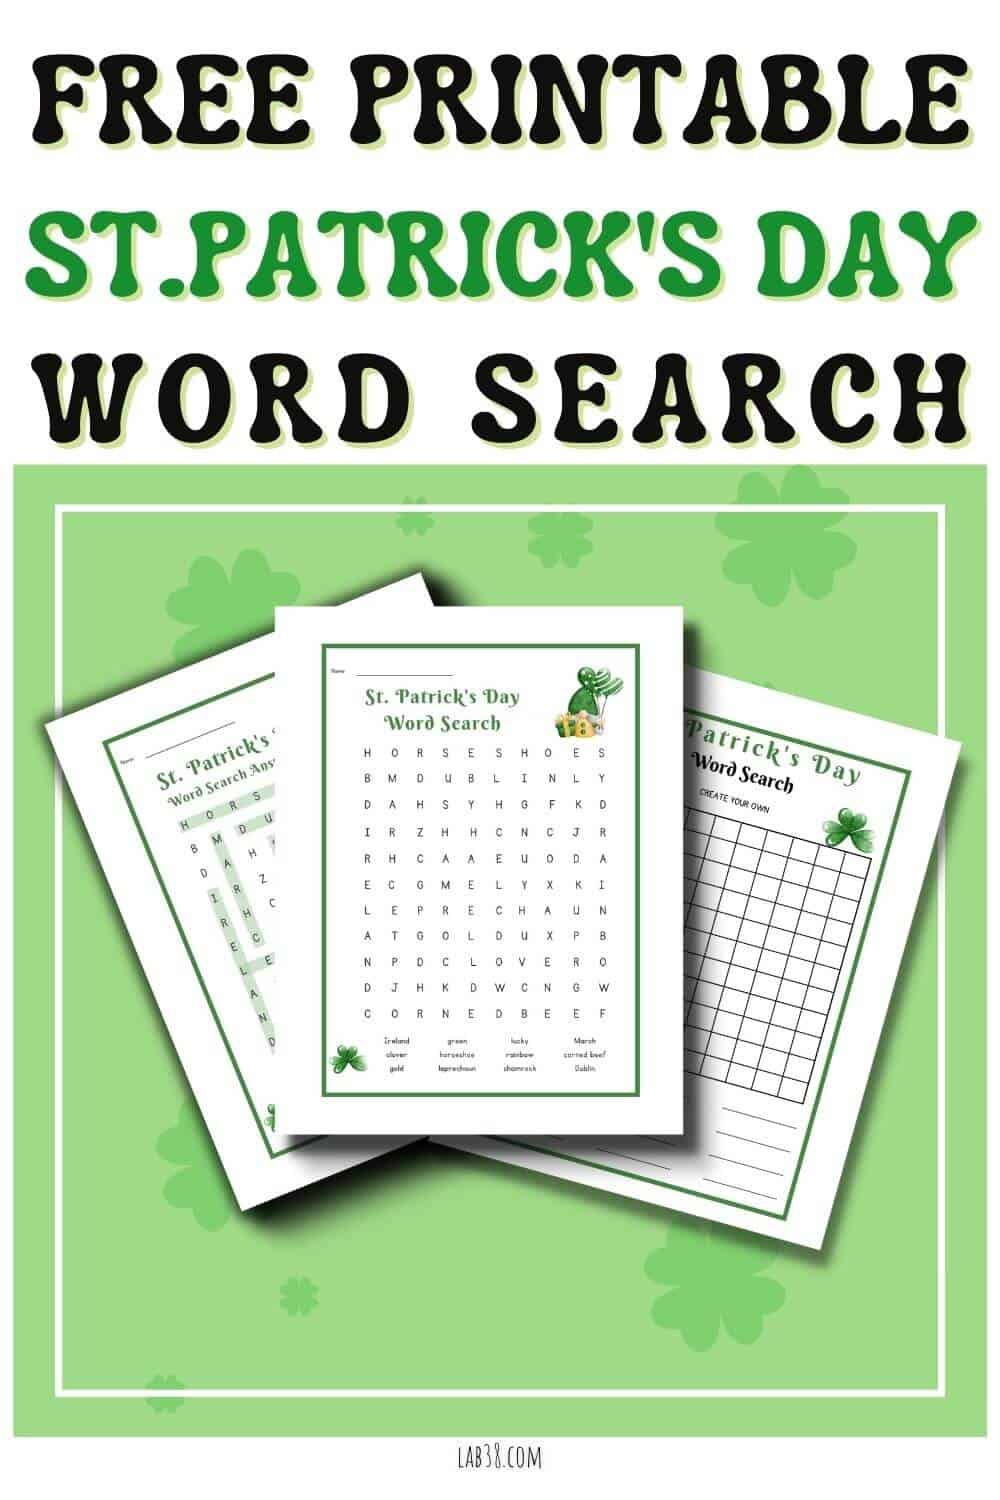 Free Printable St. Patrick's Day Word Search 